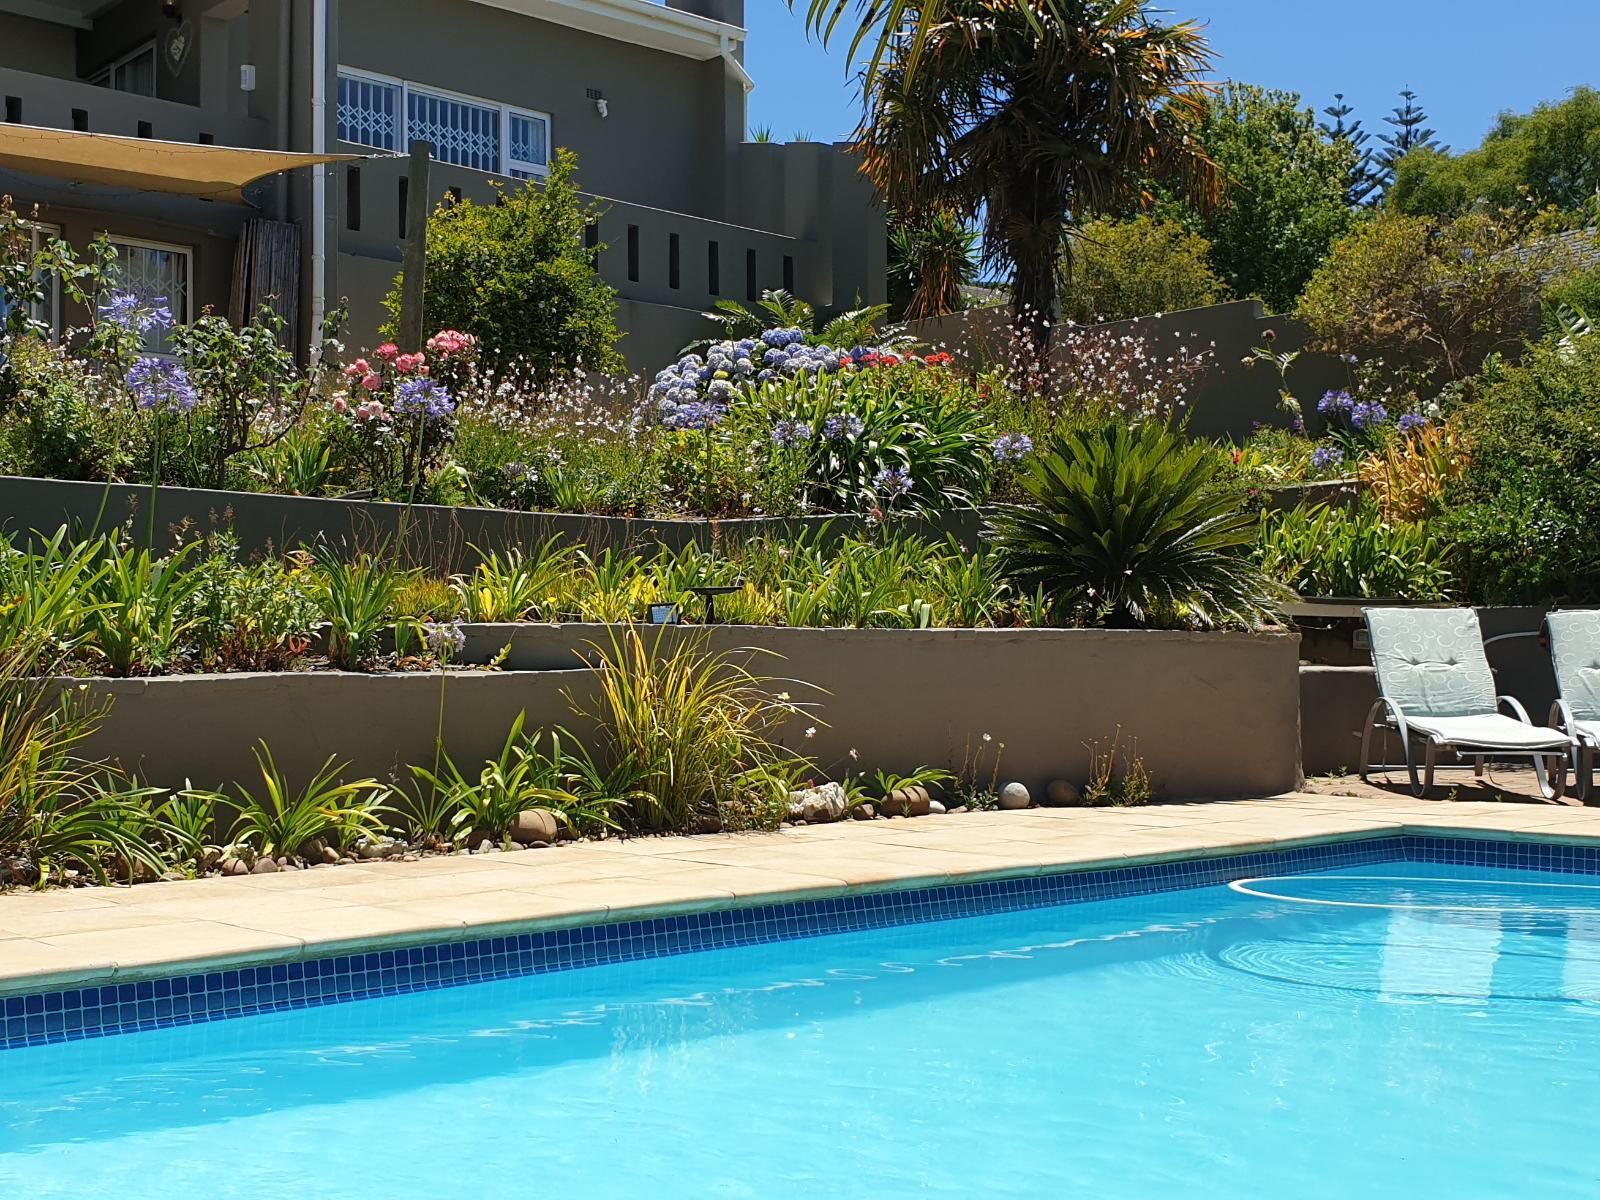 Agape Apartments Helderberg Estate Somerset West Western Cape South Africa Complementary Colors, Garden, Nature, Plant, Swimming Pool